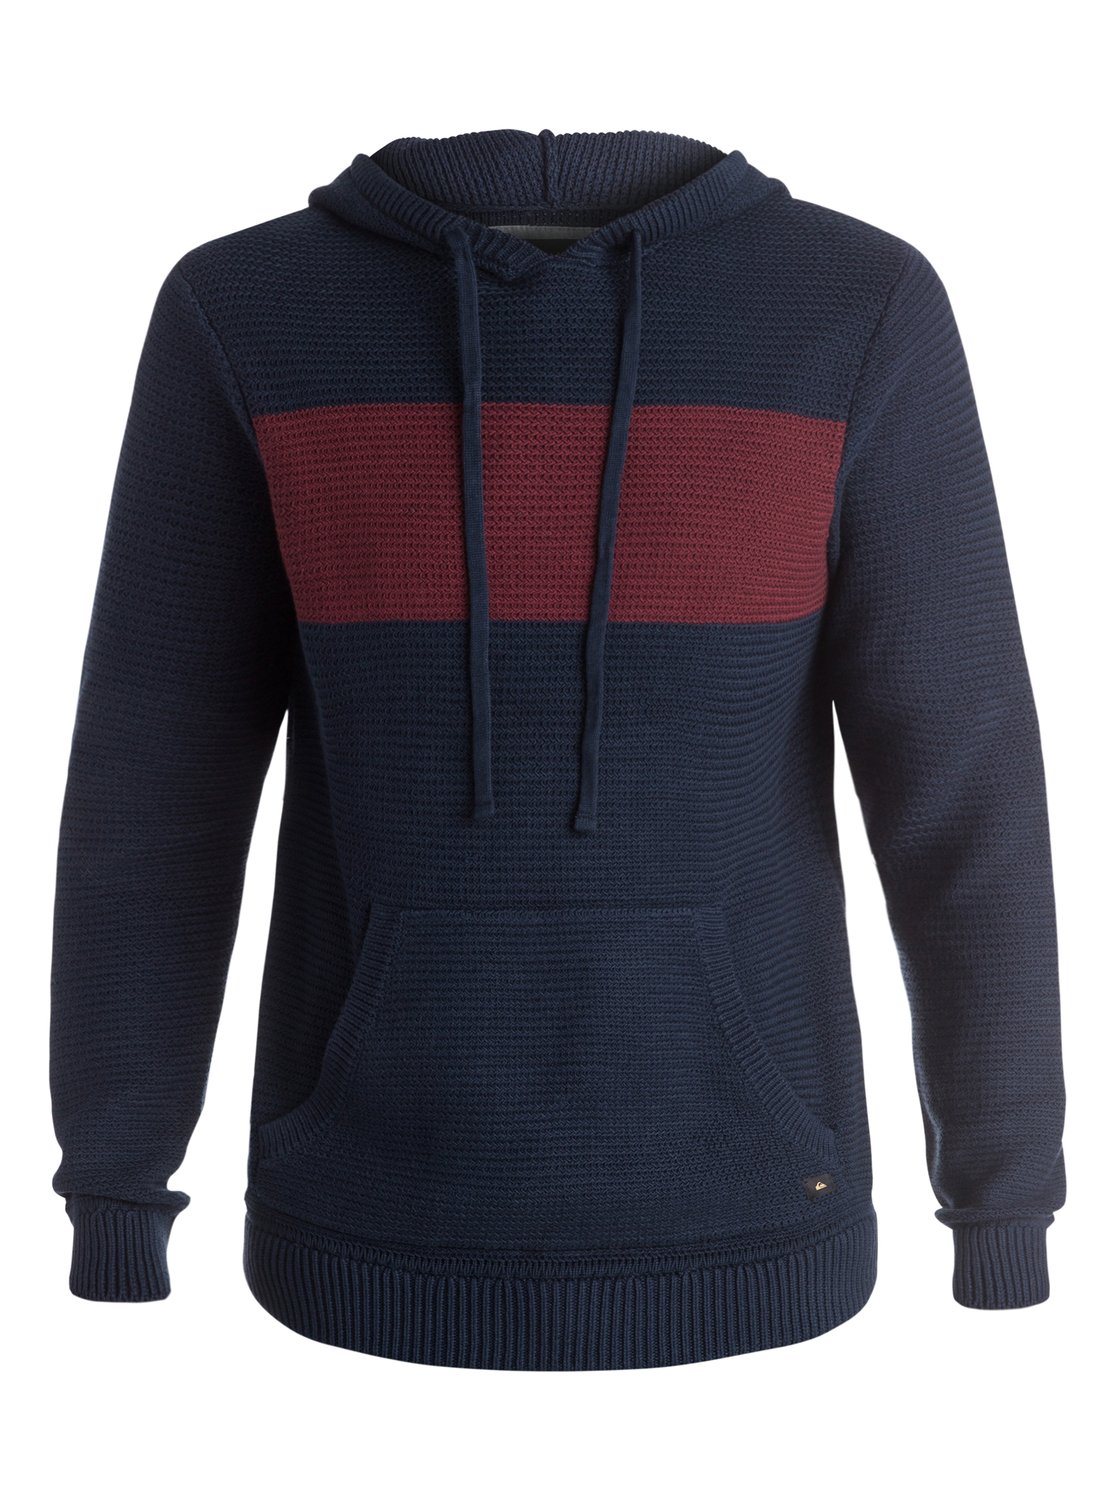 Invasion Hooded Sweater 889351244994 | Quiksilver